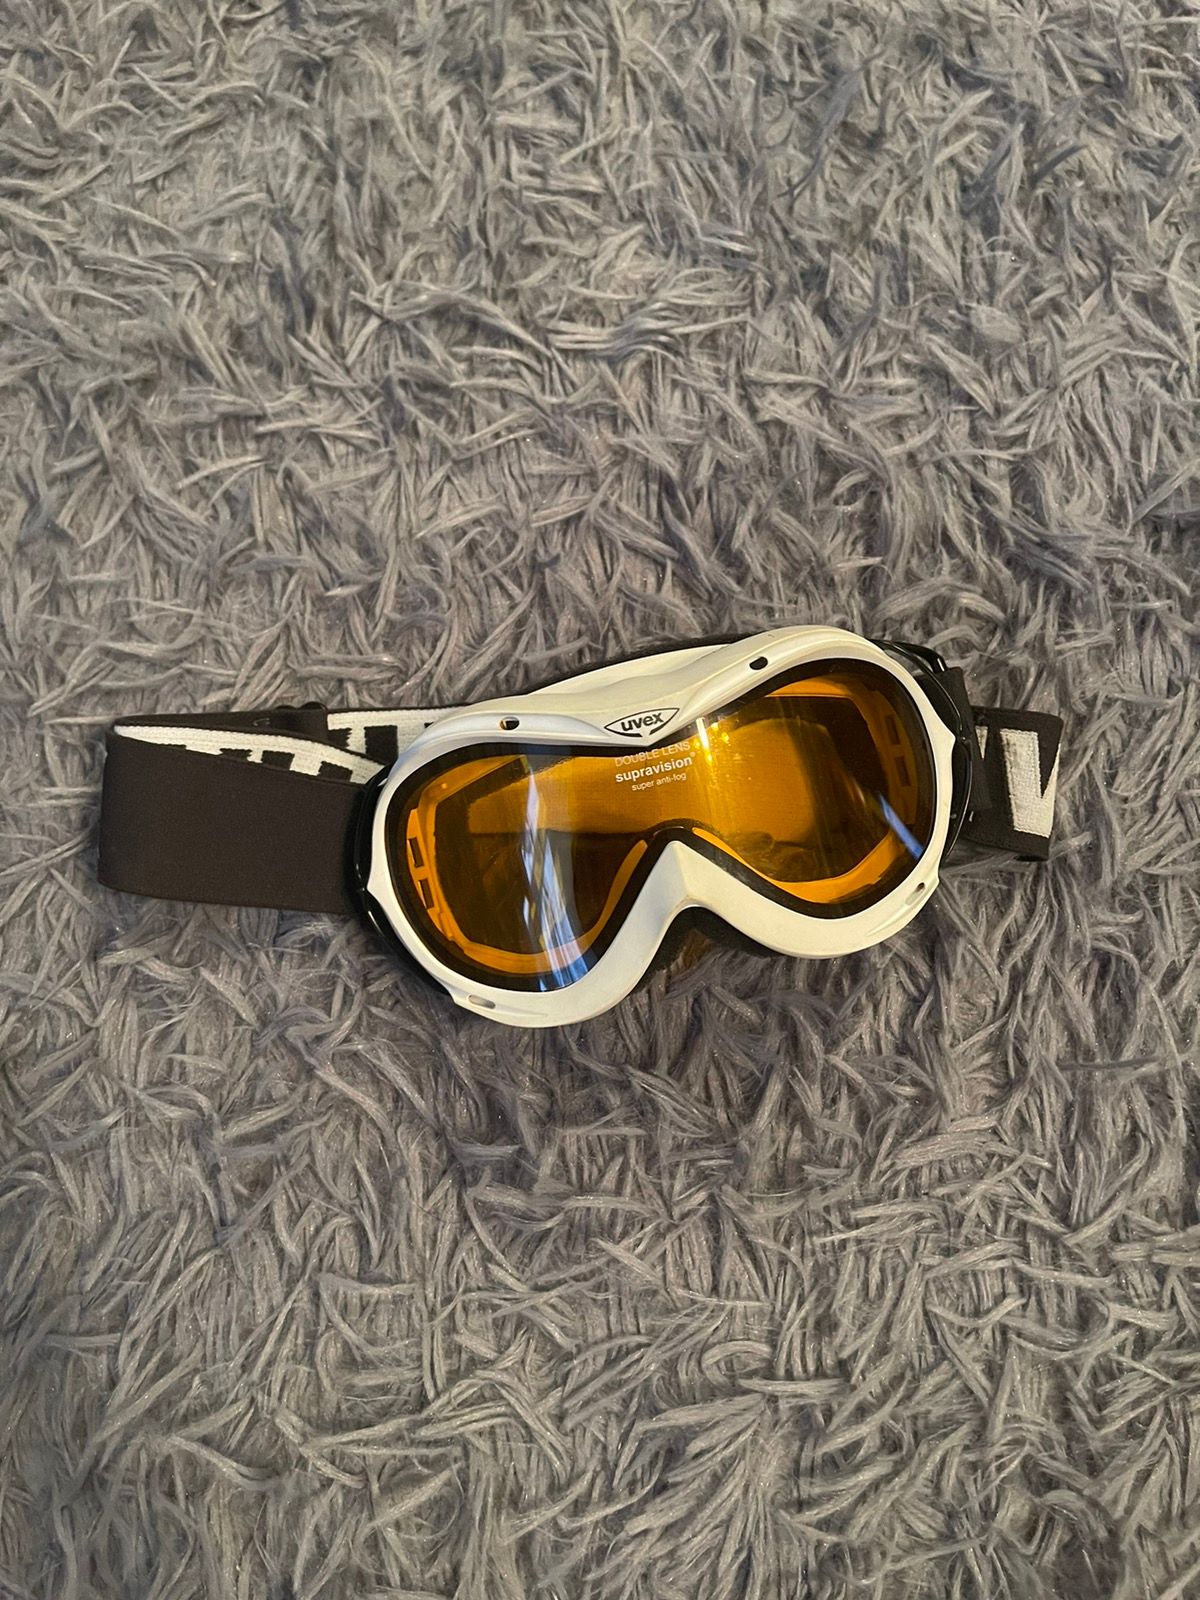 Outdoor Life Uvex ski mask gorpcore style outdoor googles glasses | Grailed